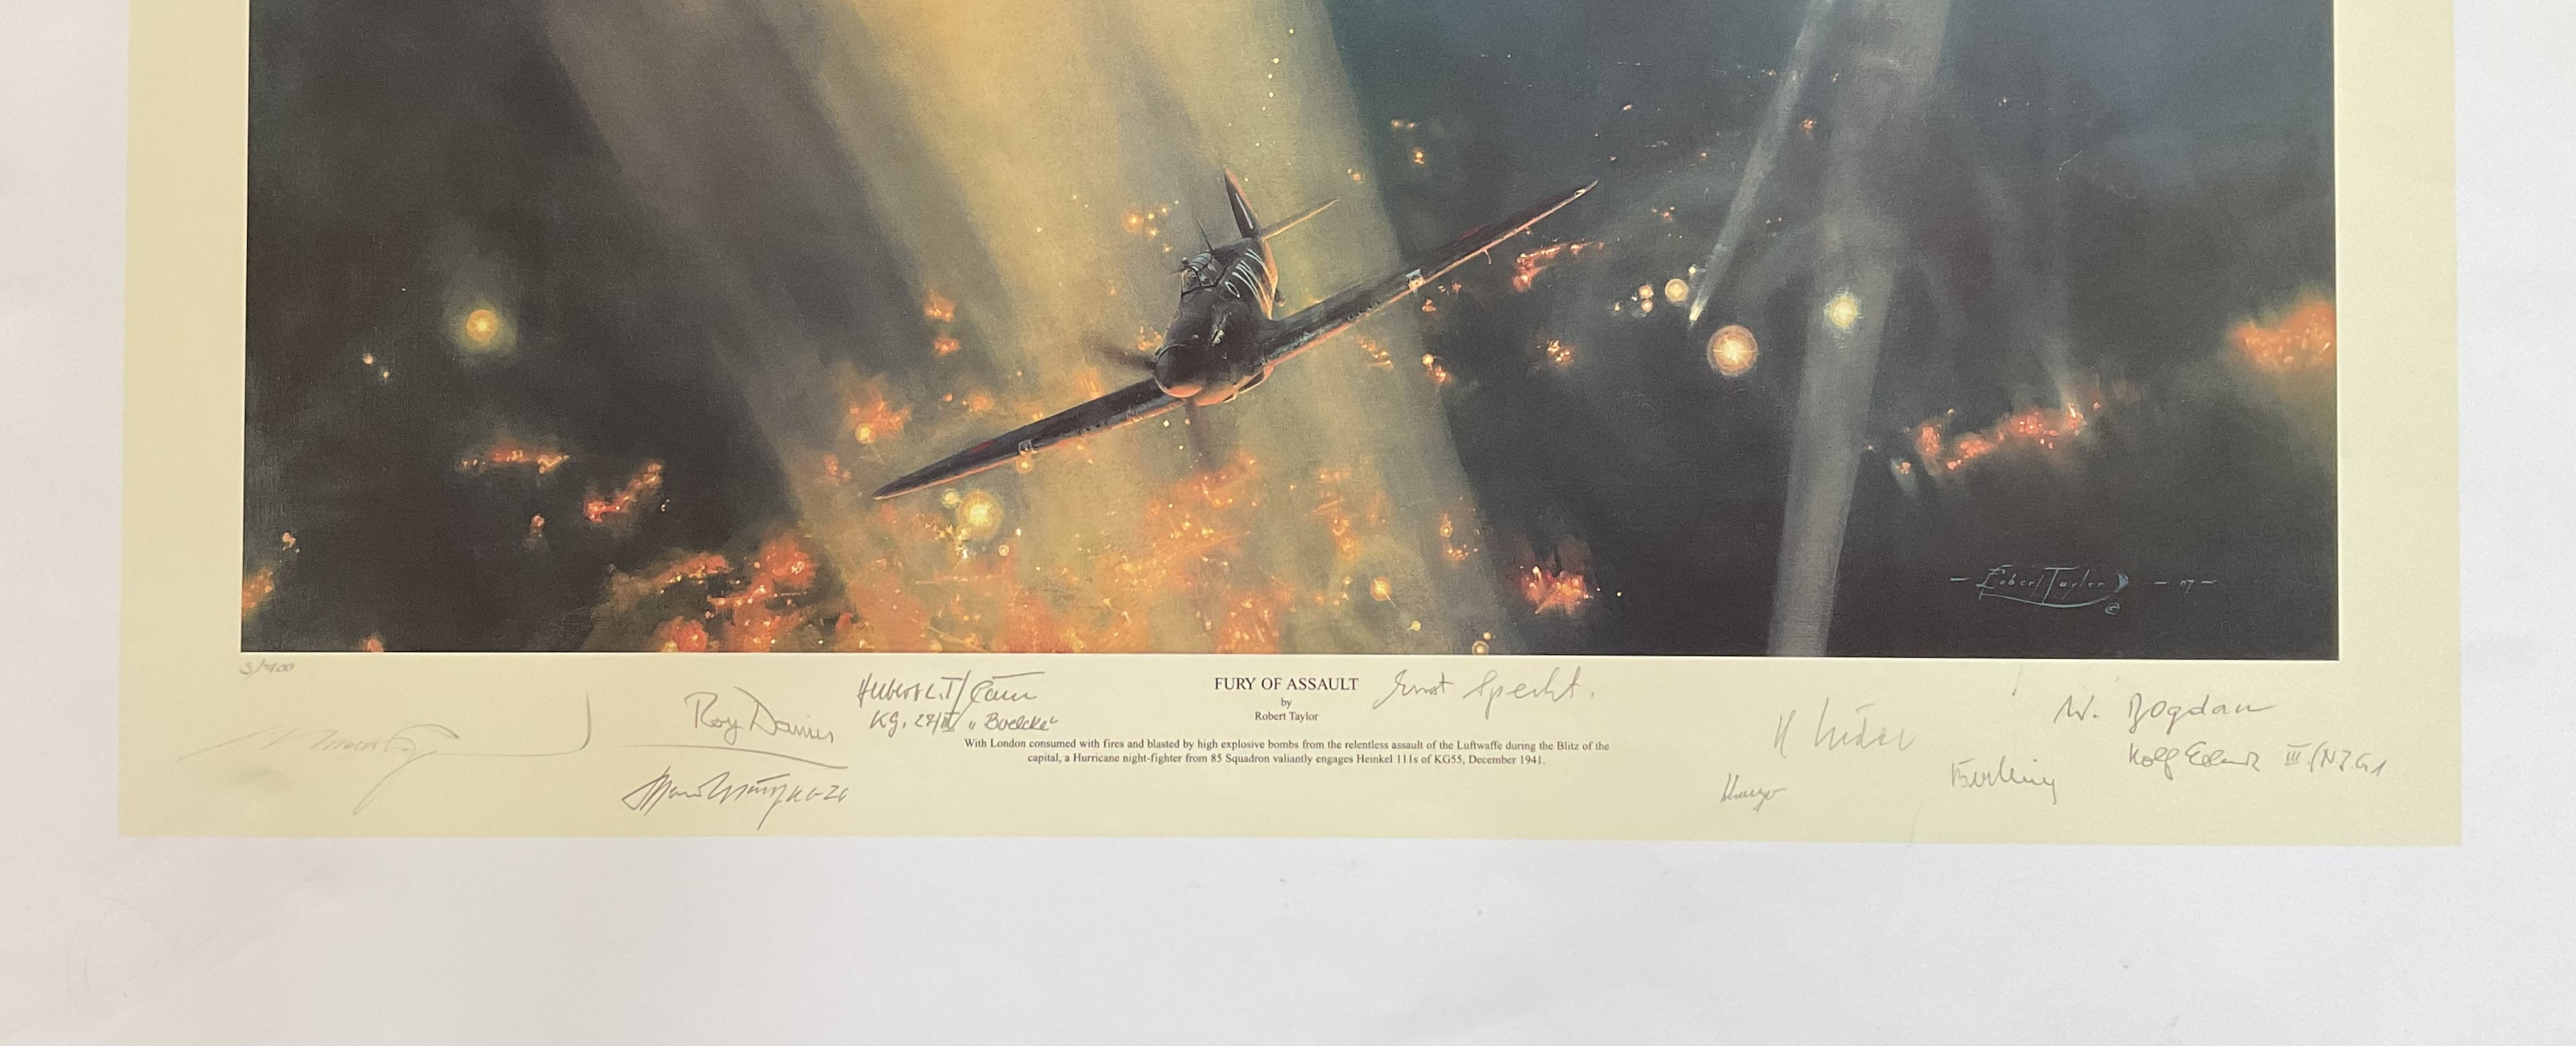 WWII Fury of Assault 29x24 inches colour print limited edition colour print 3/700 signed in pencil - Image 5 of 6